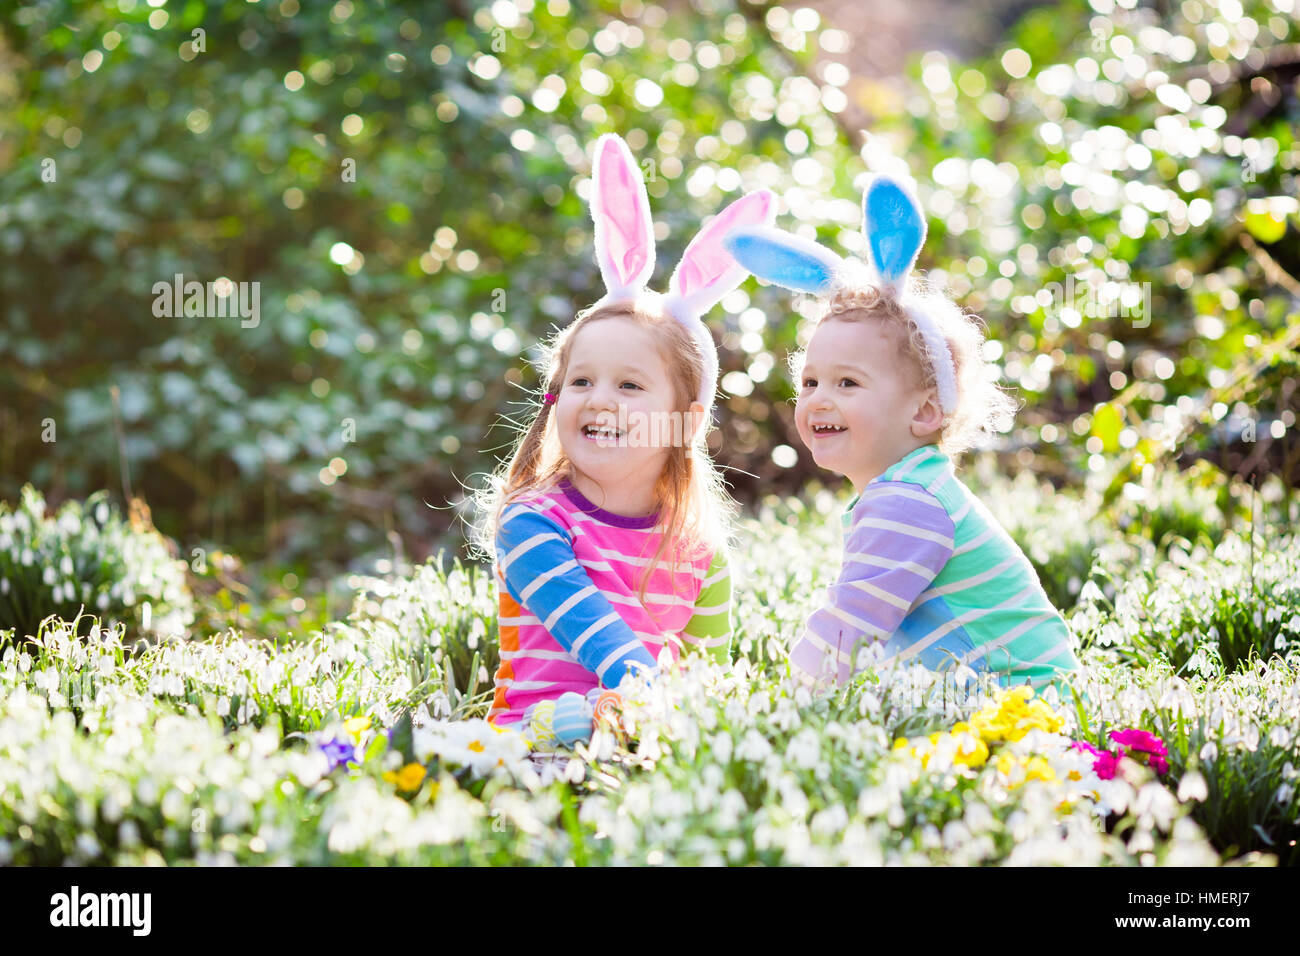 Kids on Easter egg hunt in blooming spring garden. Children with bunny ears searching for colorful eggs in snow drop flowers Stock Photo